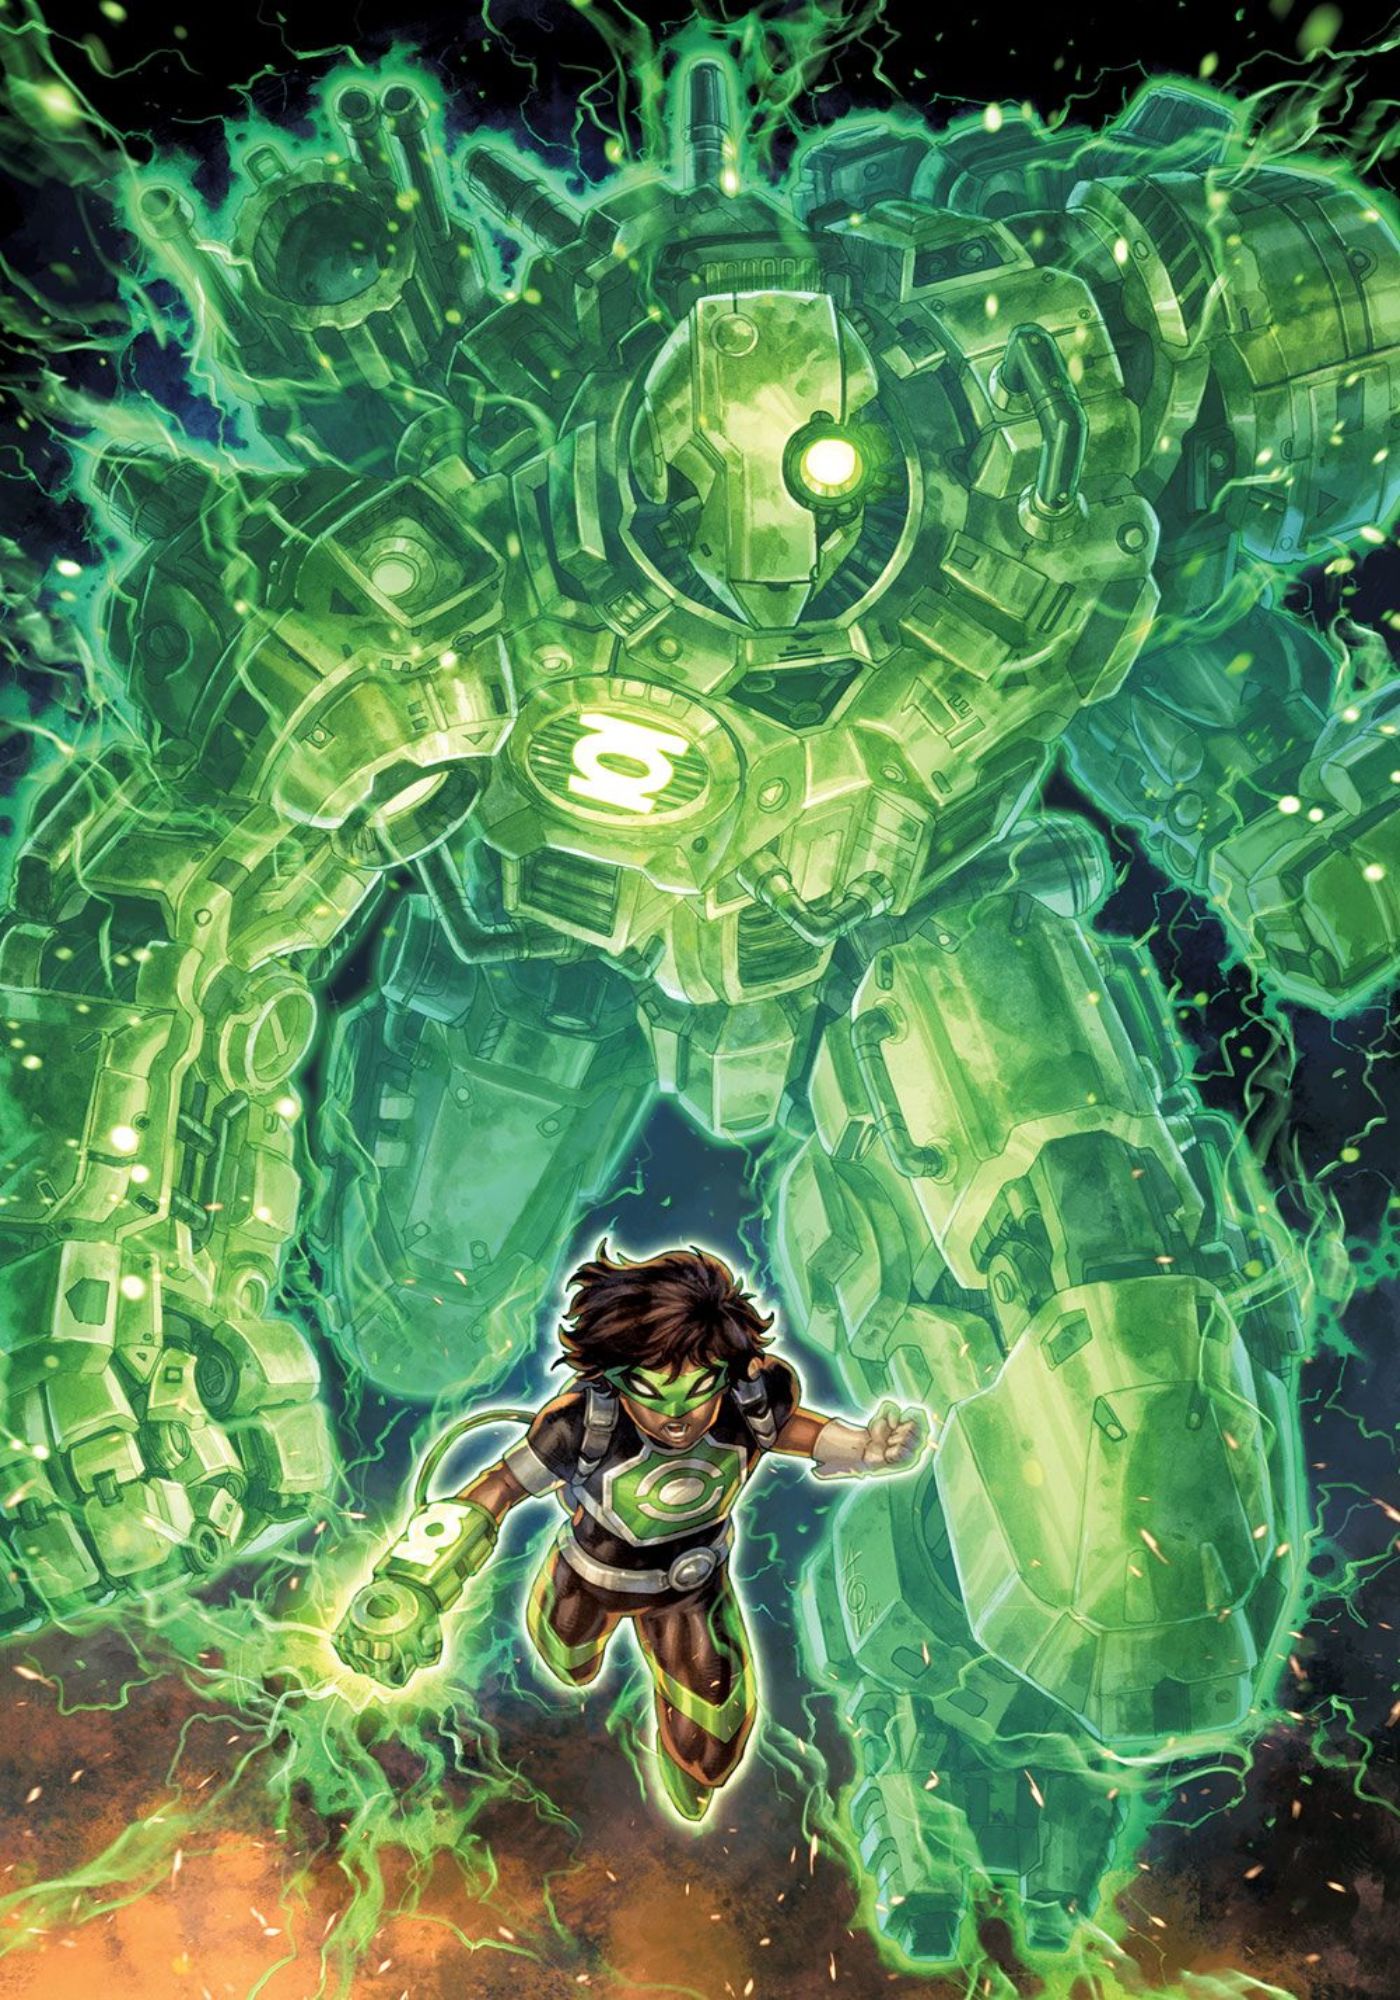 Green Lantern Reveals Unmissable New Construct in Epic Cover Art